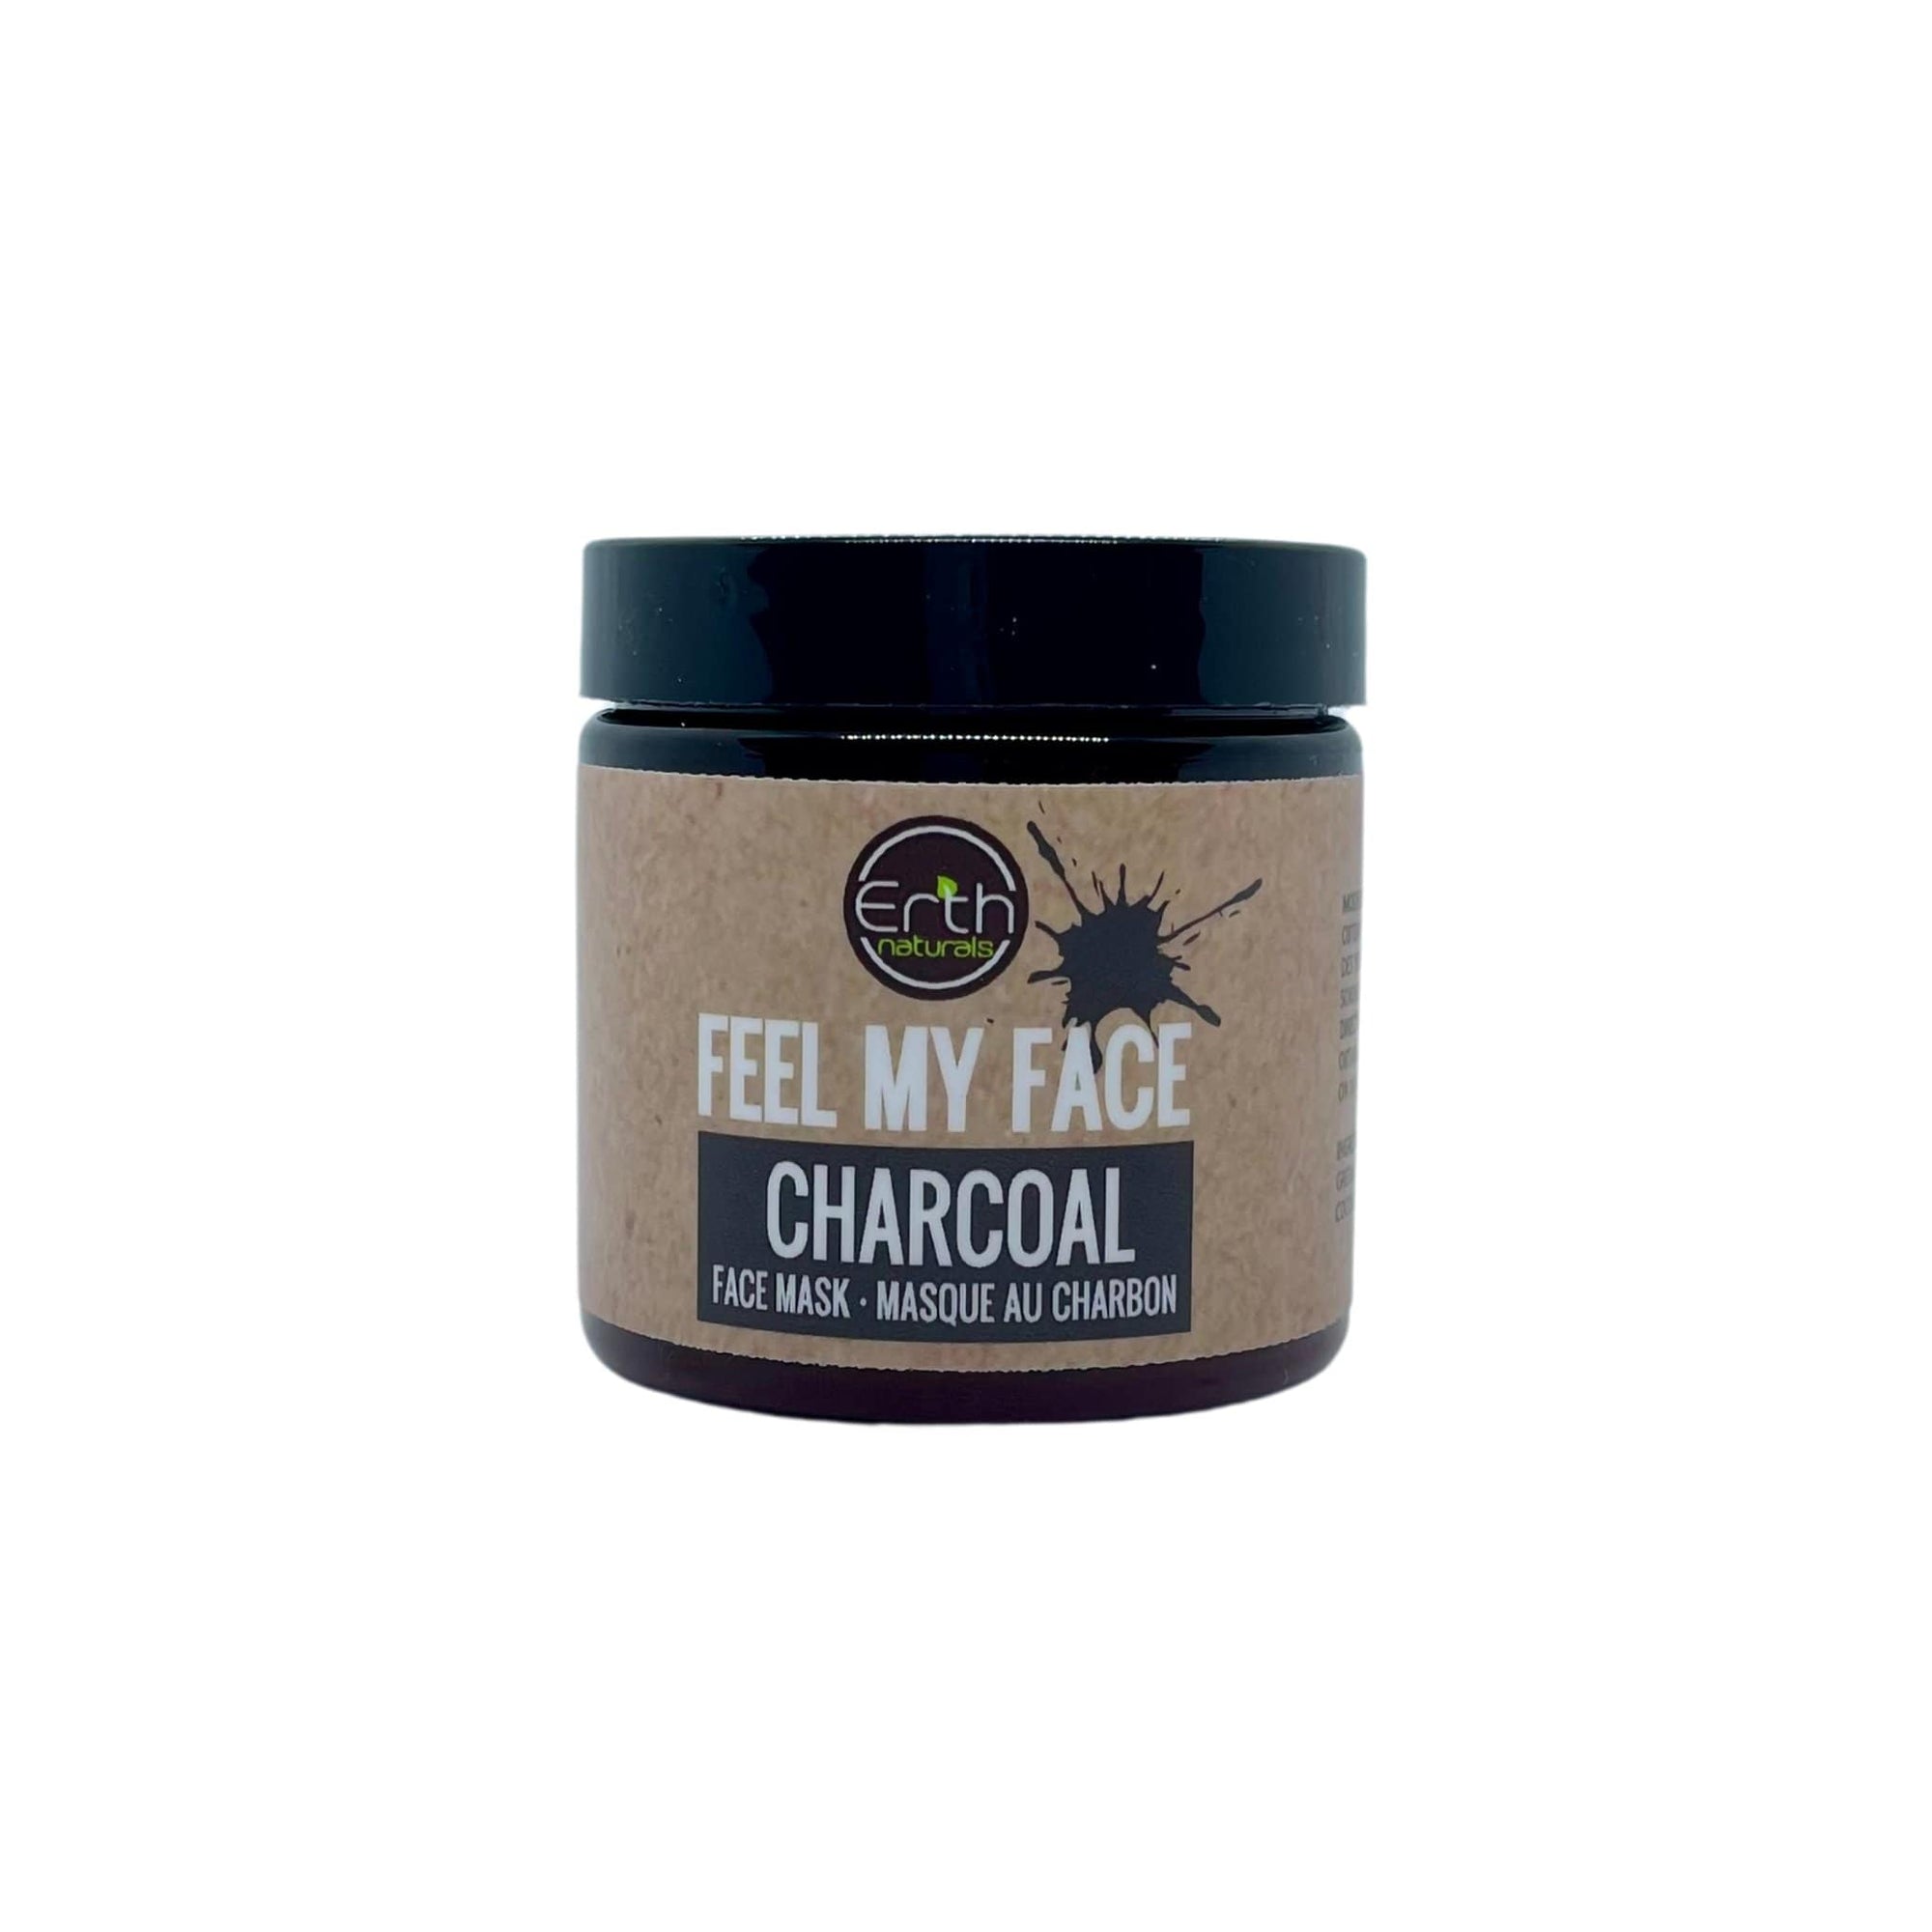 Feel My Face Charcoal Mask